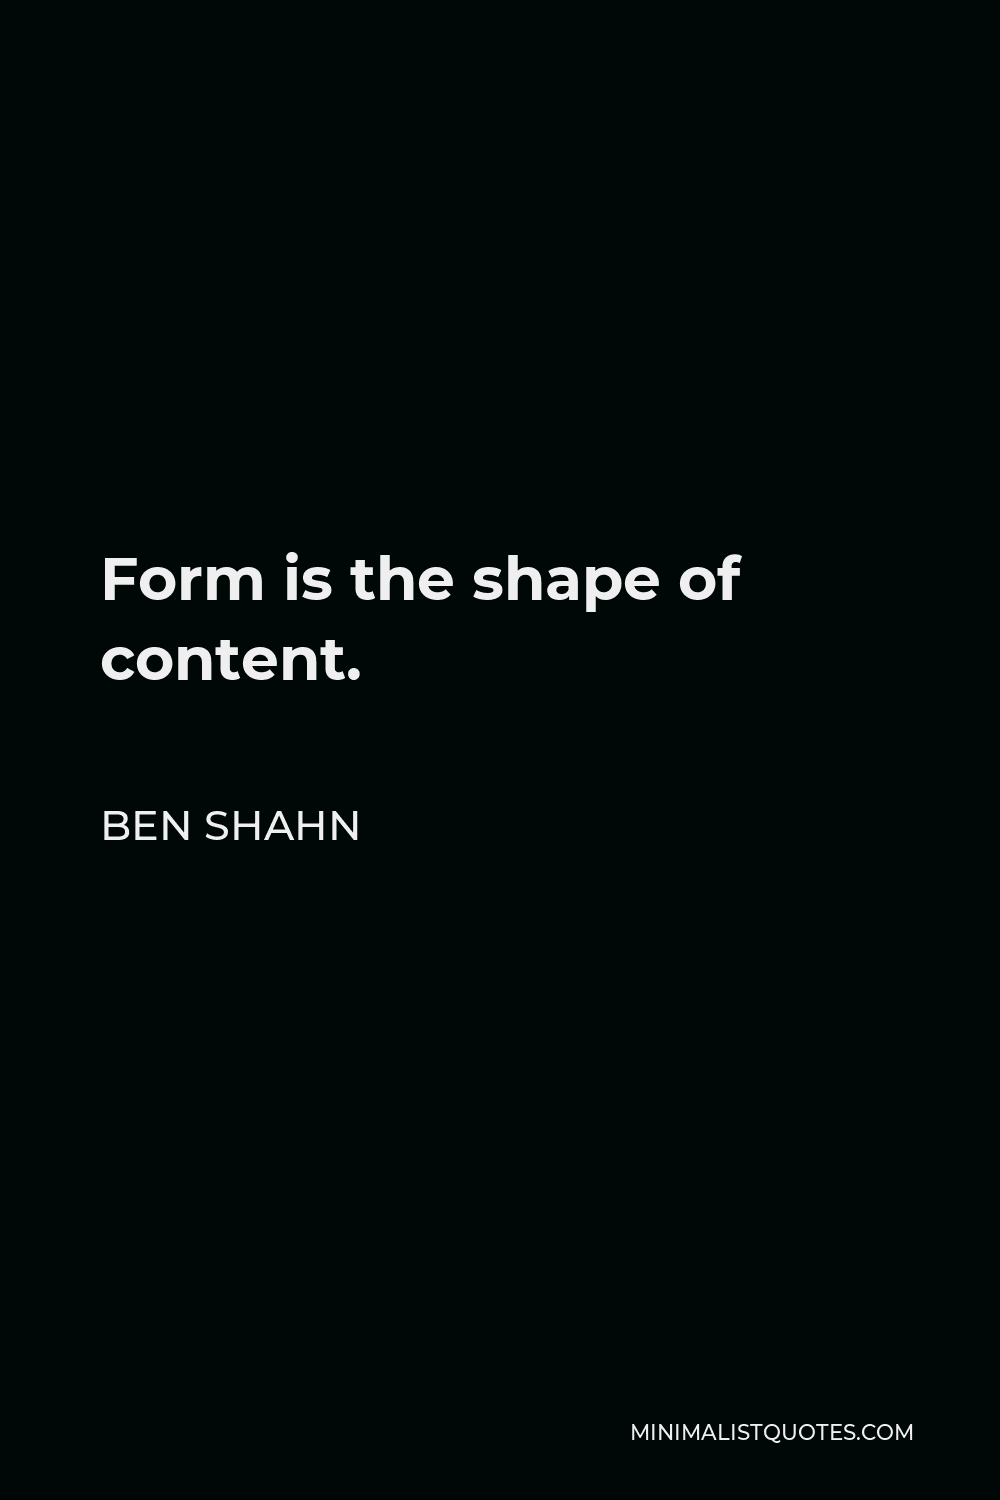 Ben Shahn Quote - Form is the shape of content.